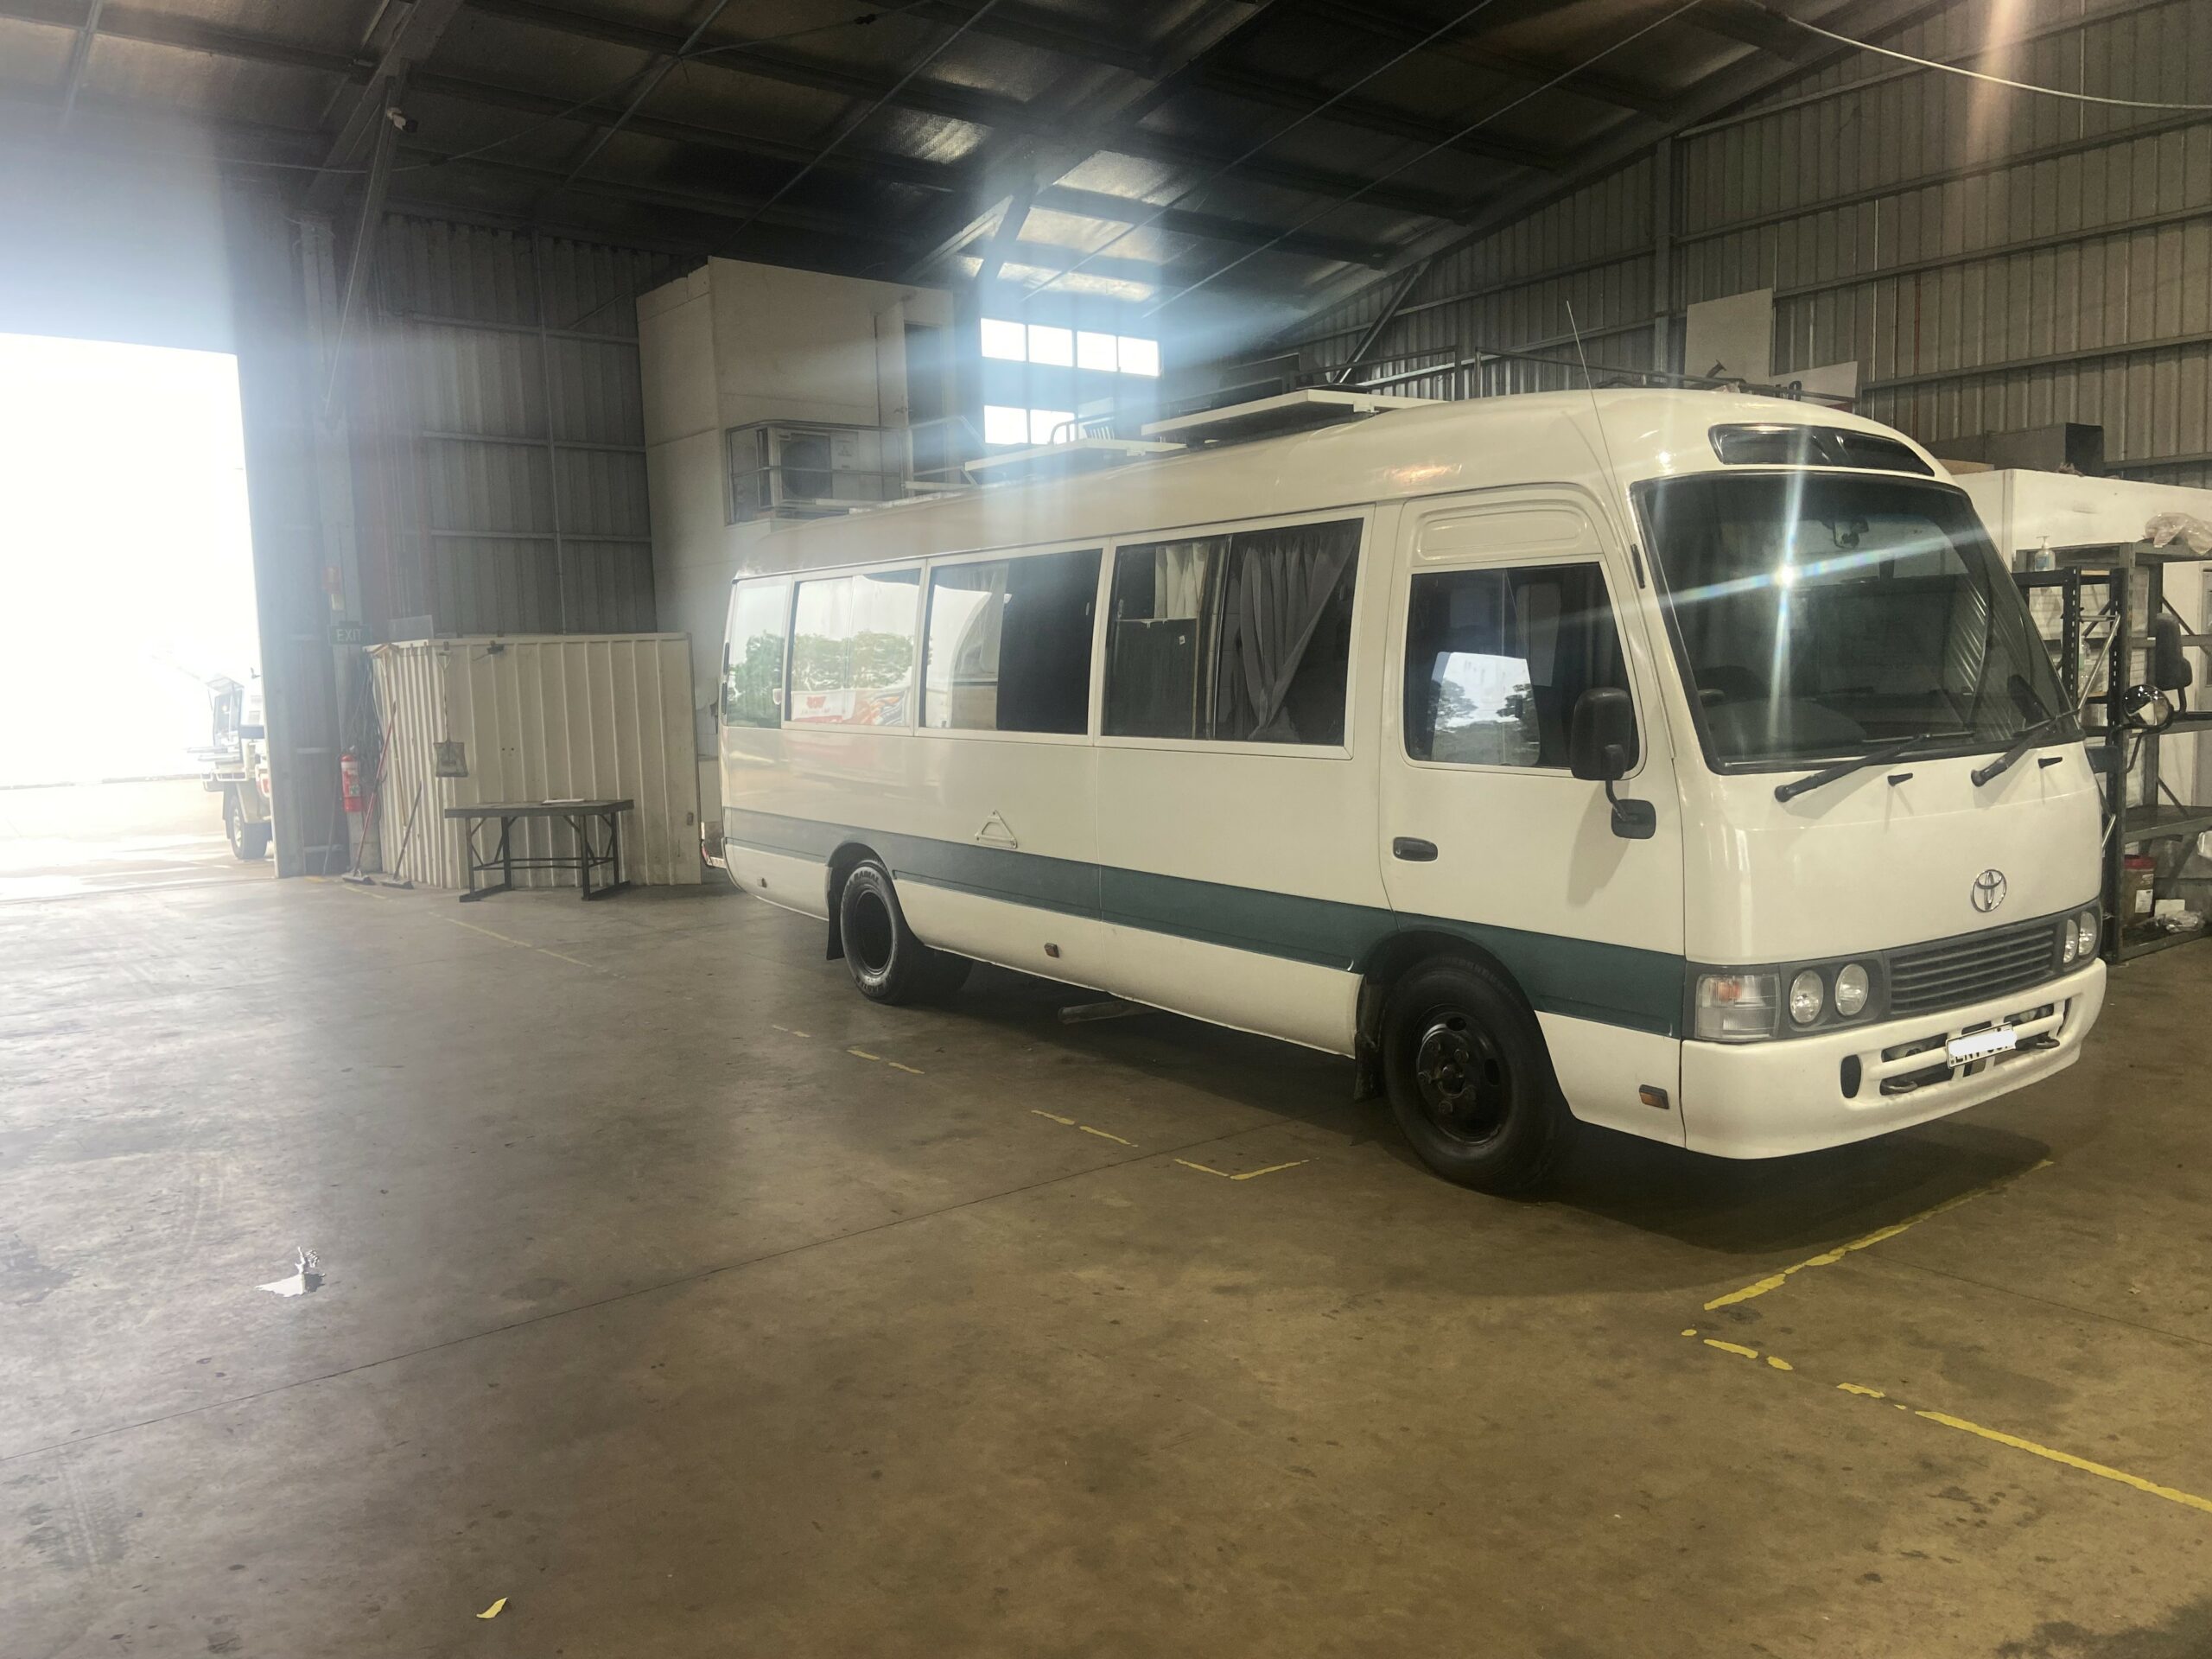 BDS Mechanical Repairs Bundaberg with an RV parked outside the workshop